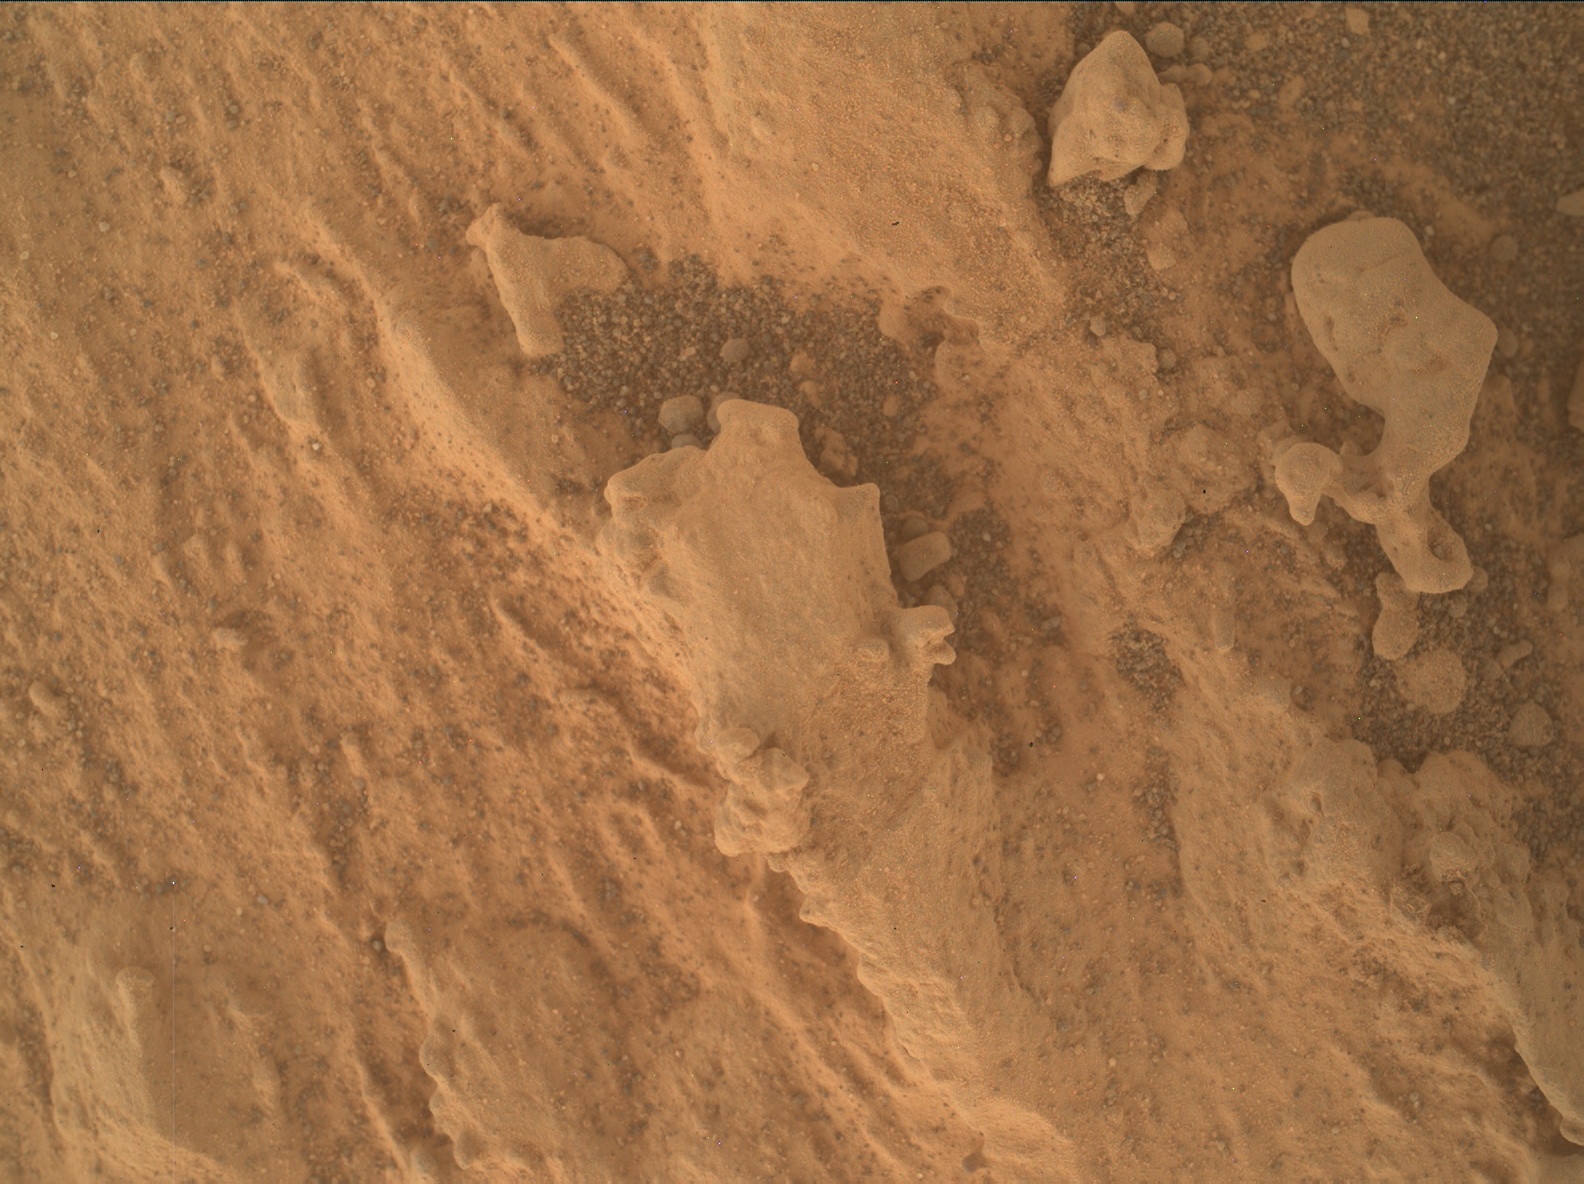 Nasa's Mars rover Curiosity acquired this image using its Mars Hand Lens Imager (MAHLI) on Sol 3197